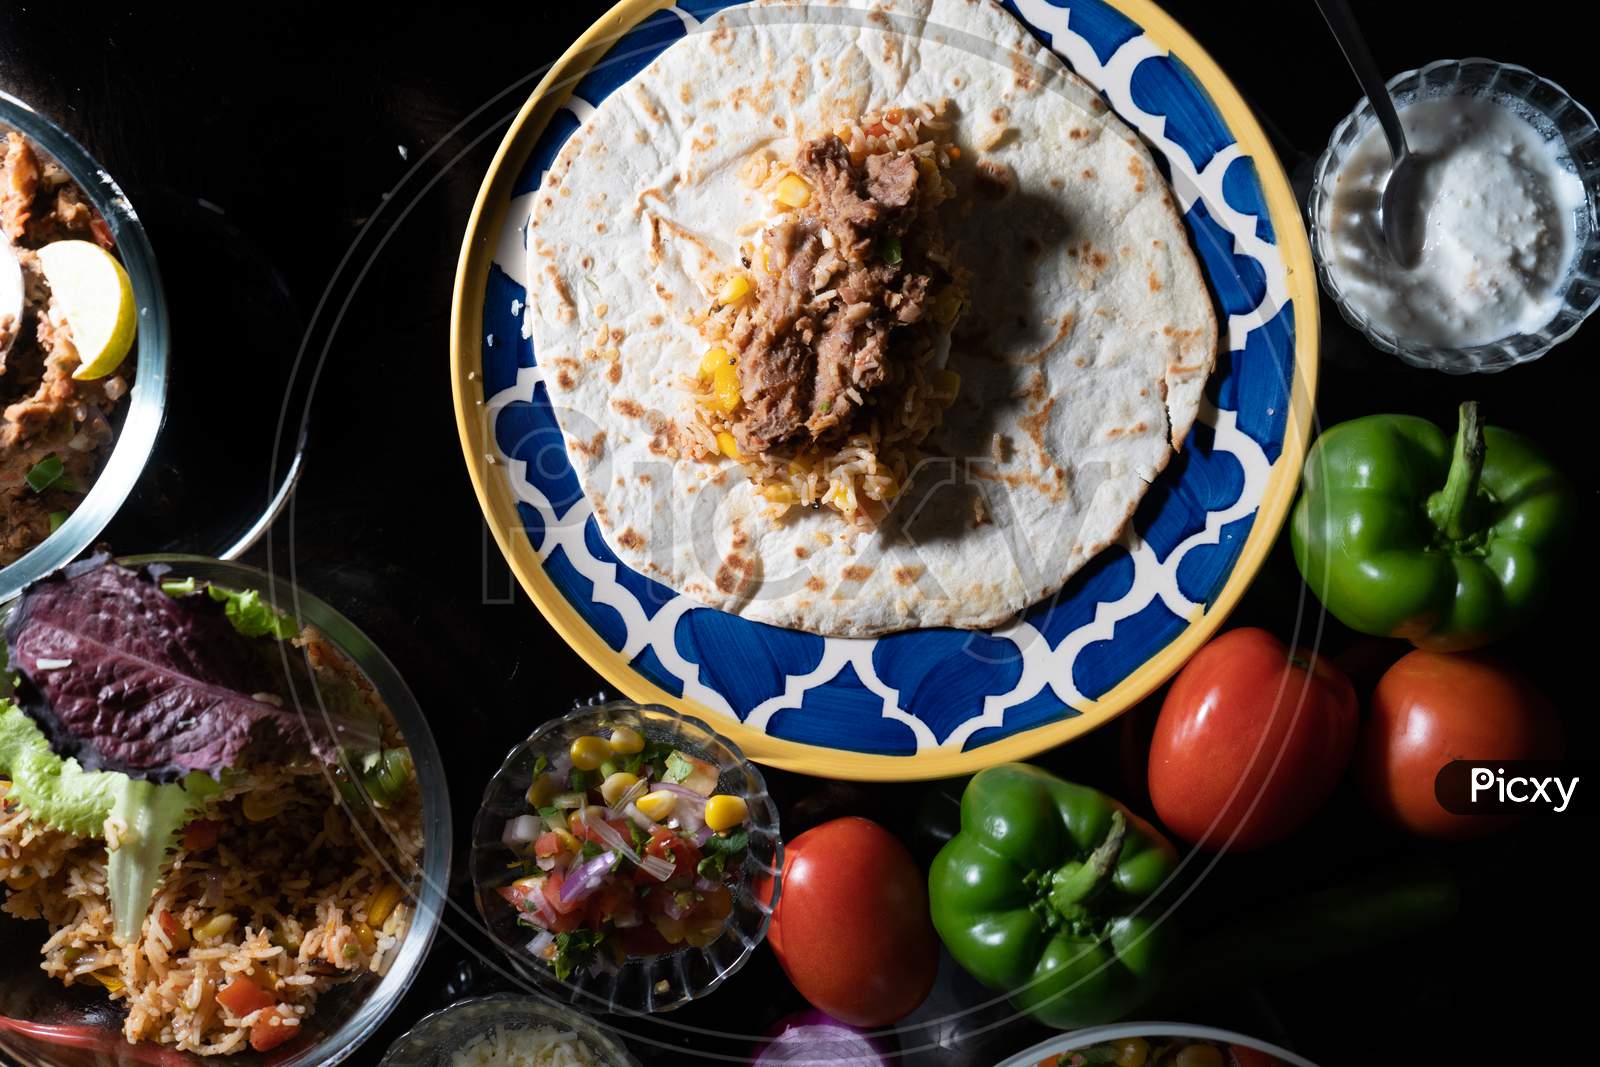 Top Flatlay Low Key Moody Shot Showing Roti Paratha Tortilla Flatbread On Glass Plate Surrounded By Fresh Vegetables Like Capsicum, Tomatos, Rice And Meat All The Ingridients To Prepare Mexican Food